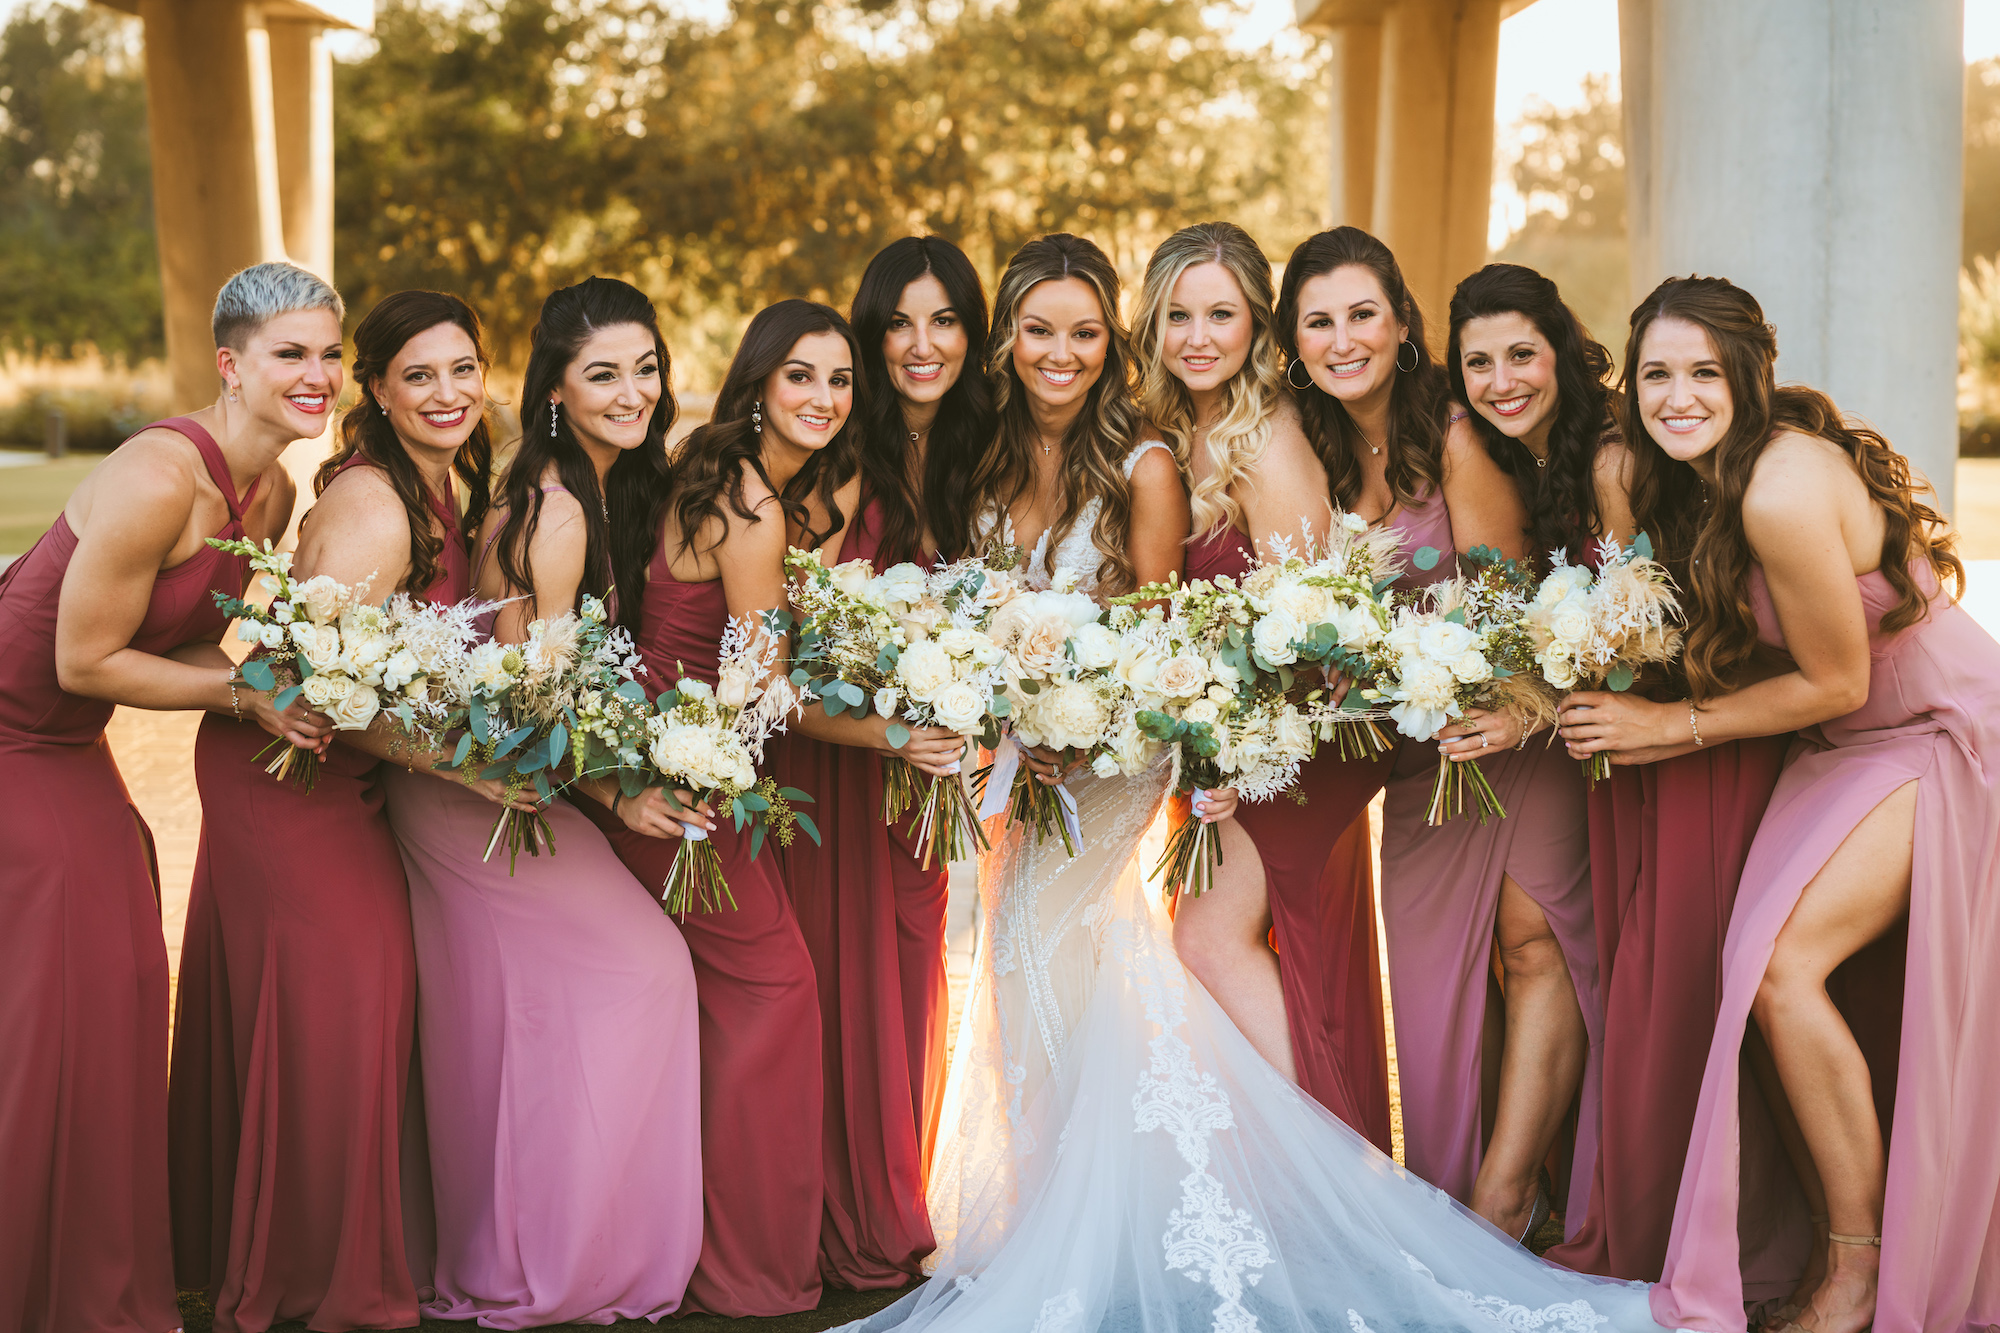 Bride with Bridesmaids in Mix and Match Red and Pink Bridesmaids Floor Length Dresses Wedding Portrait | Florida Photographer Mars and The Moon Films